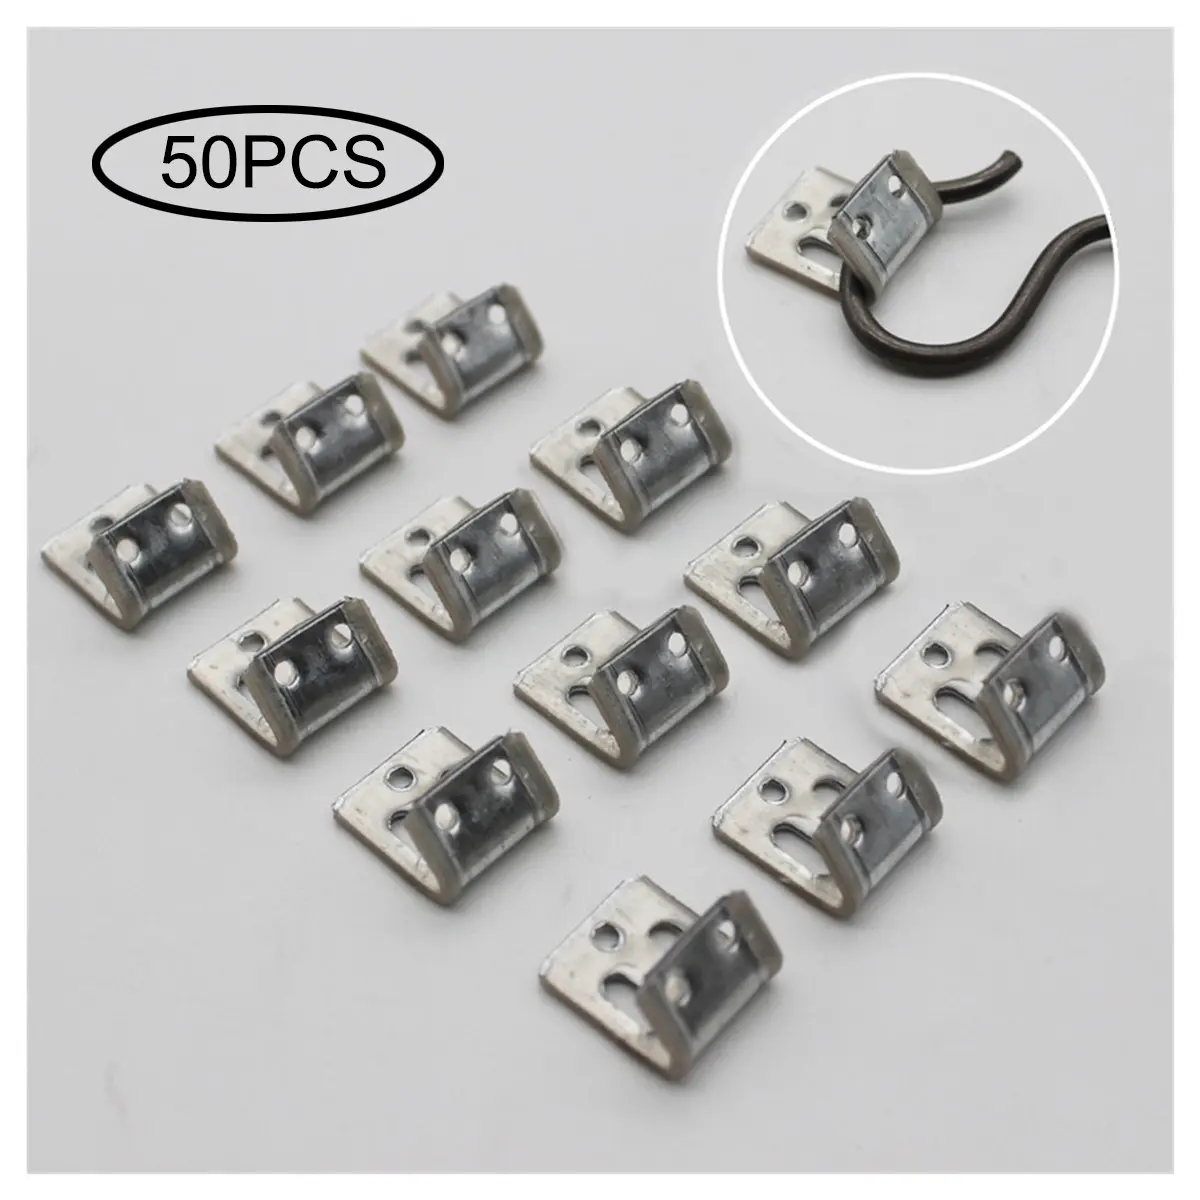 Sofa Spring Repair Clips S Clip with Plastic Wrap for Furniture Chair Couch Upholstery Springs Clamp  Replacement Accessories